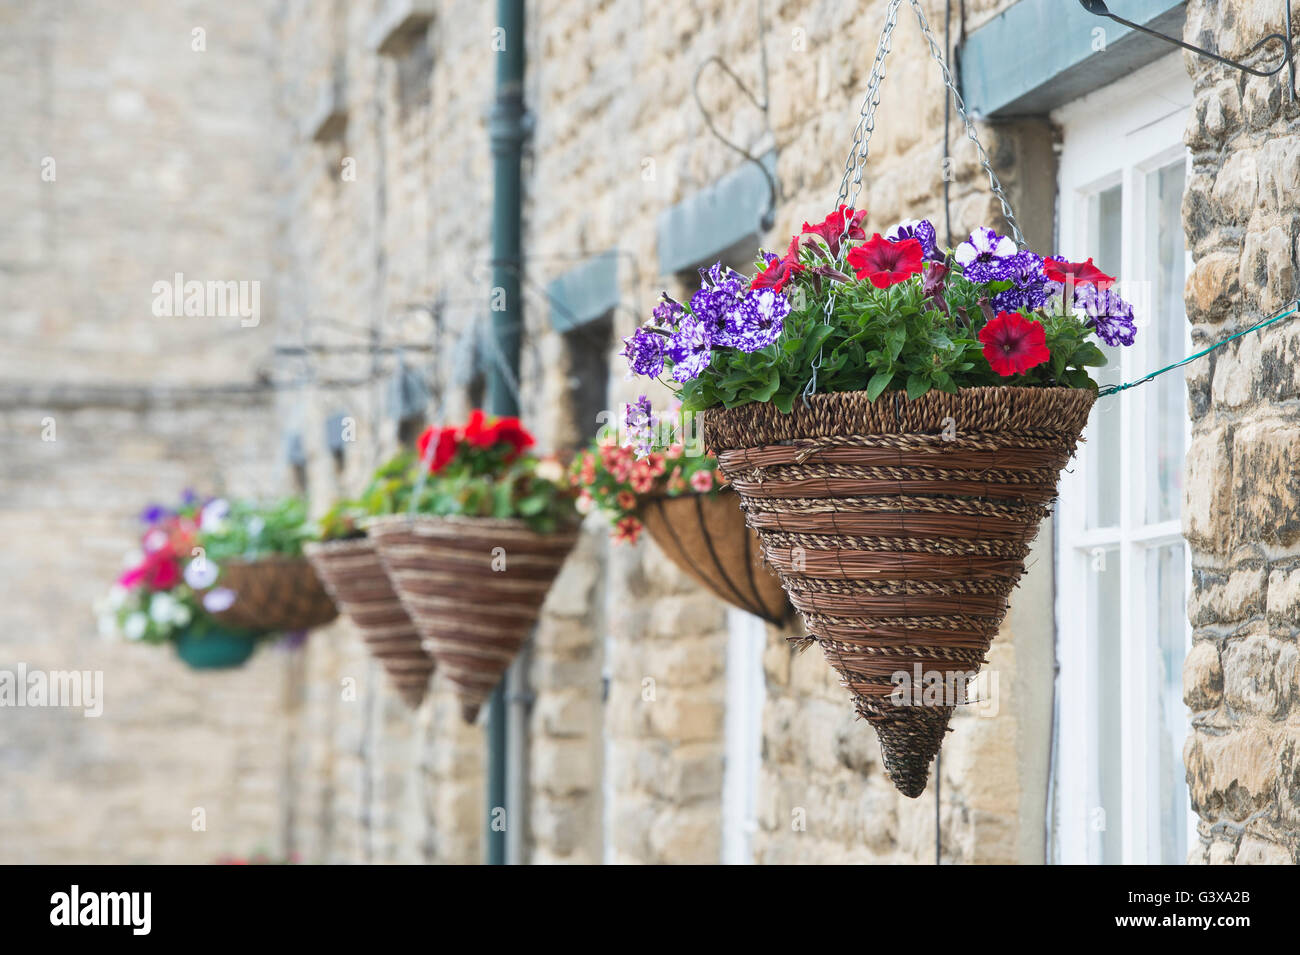 Hanging baskets in front of stone buildings. Bampton, Oxfordshire, England Stock Photo